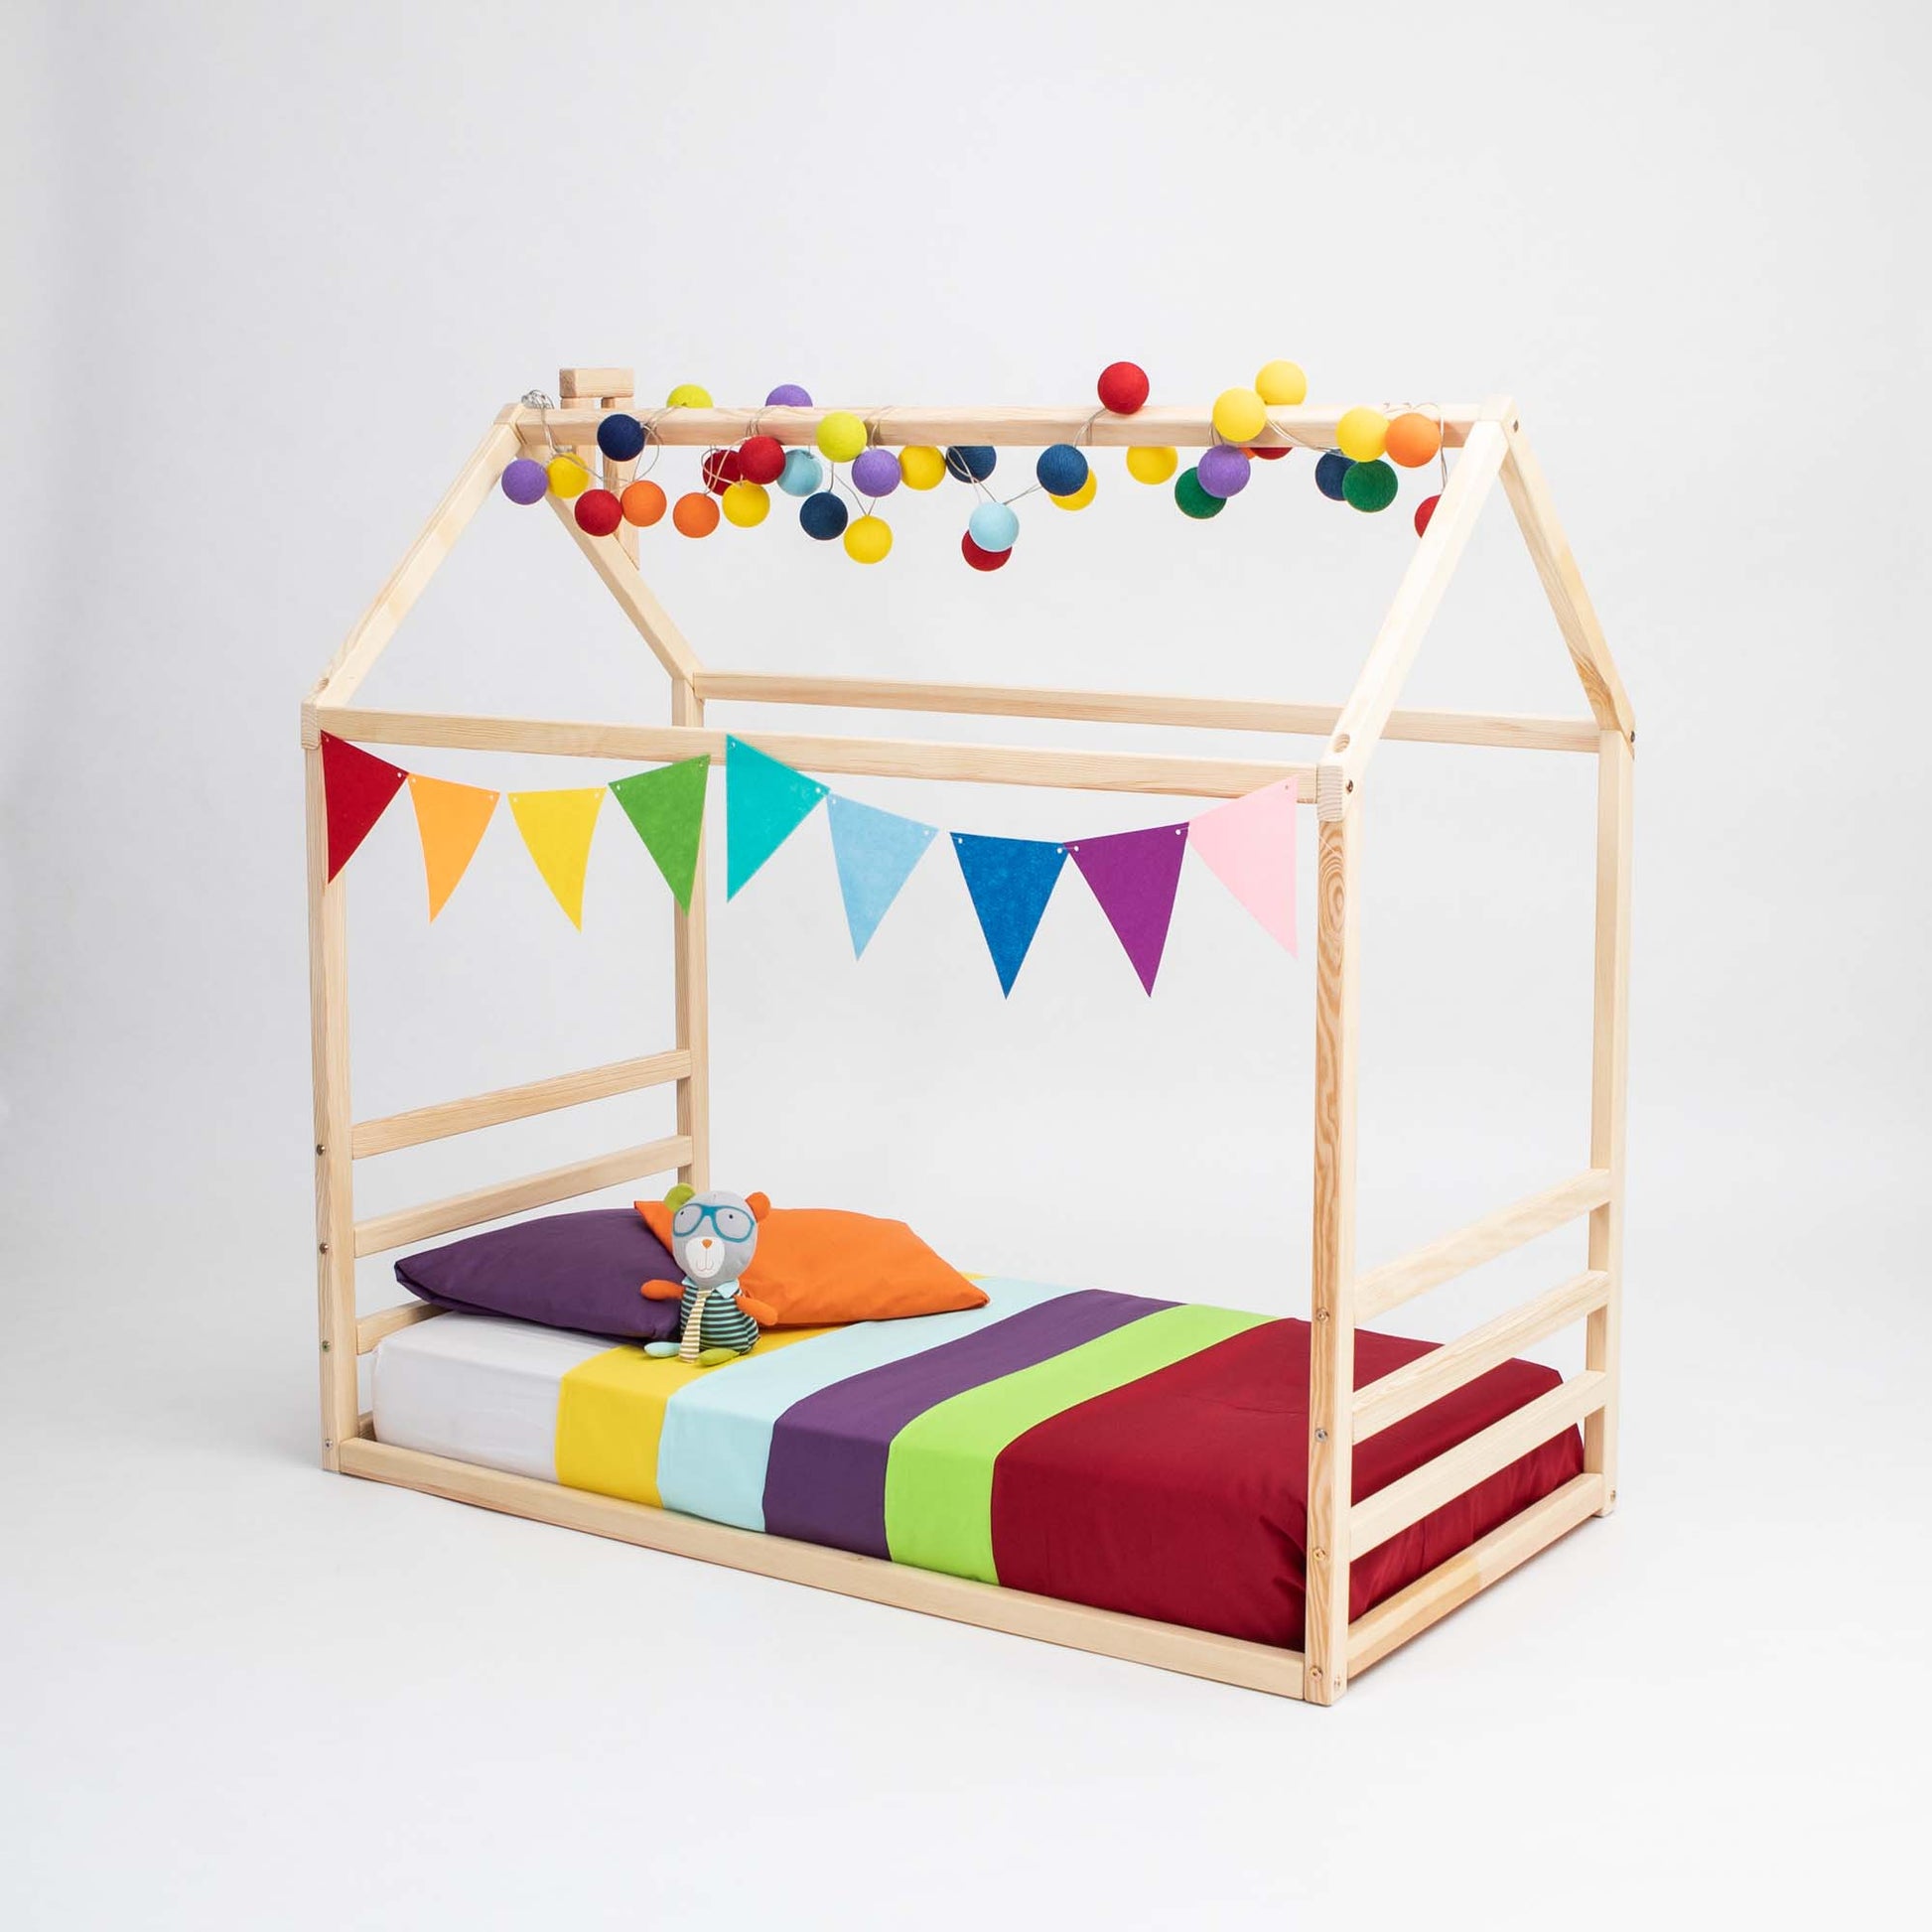 A floor house-frame bed with a horizontal headboard and footboard adorned with multicolored felt ball garland and triangular flags. The bed has colorful bedding consisting of striped blankets and pillows, and a plush toy sits on top.